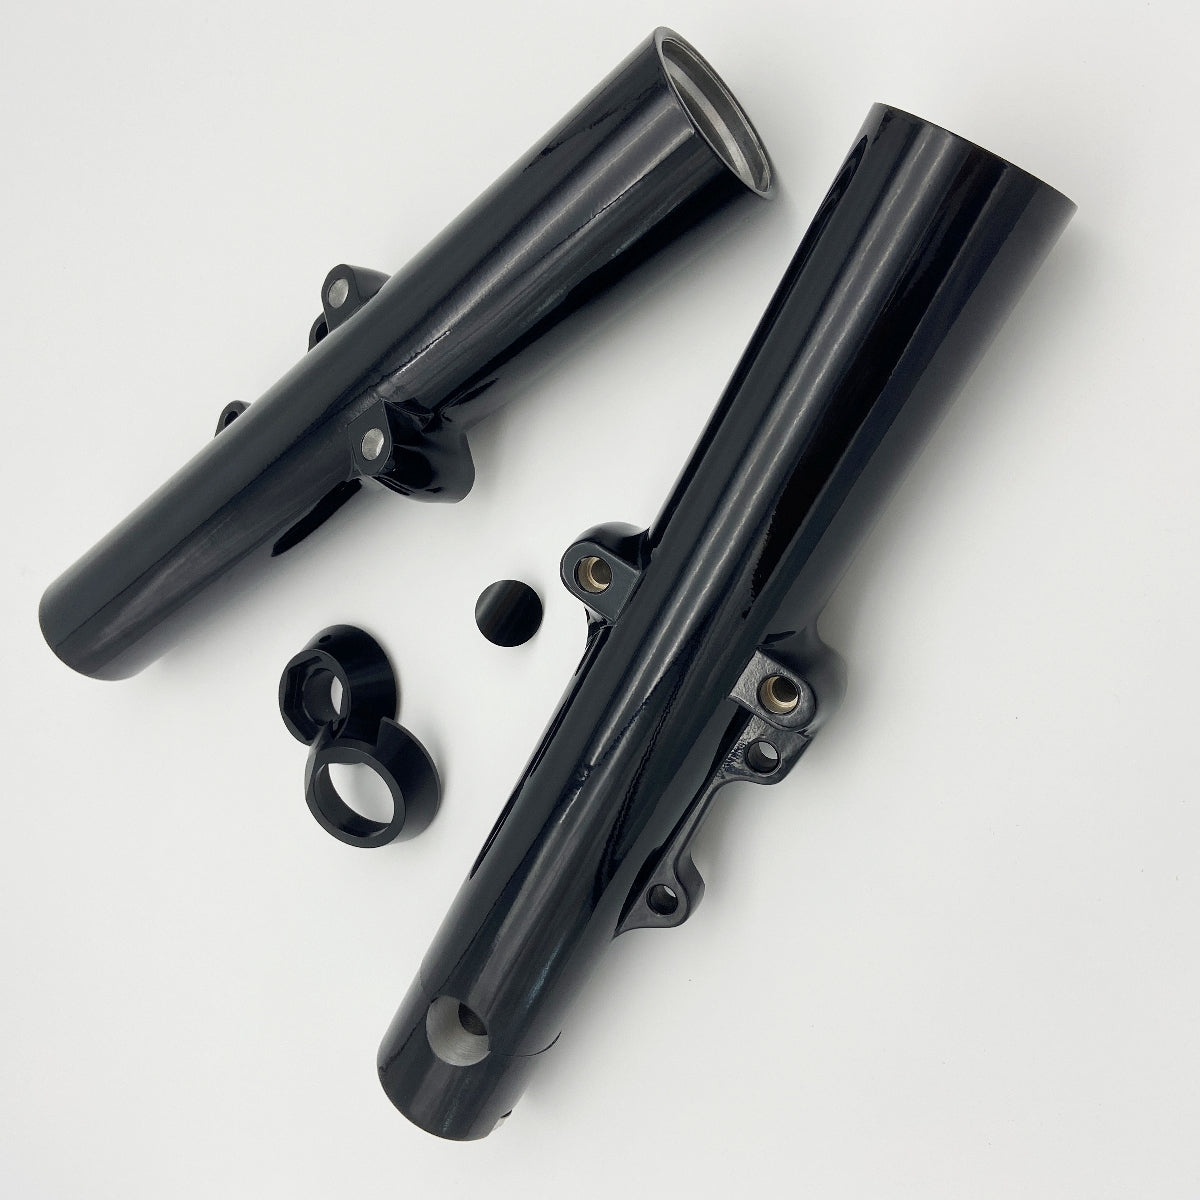 49mm Fork Conversion Kit2A for 2013 & earlier Touring, 2014-later Fork-Sliders